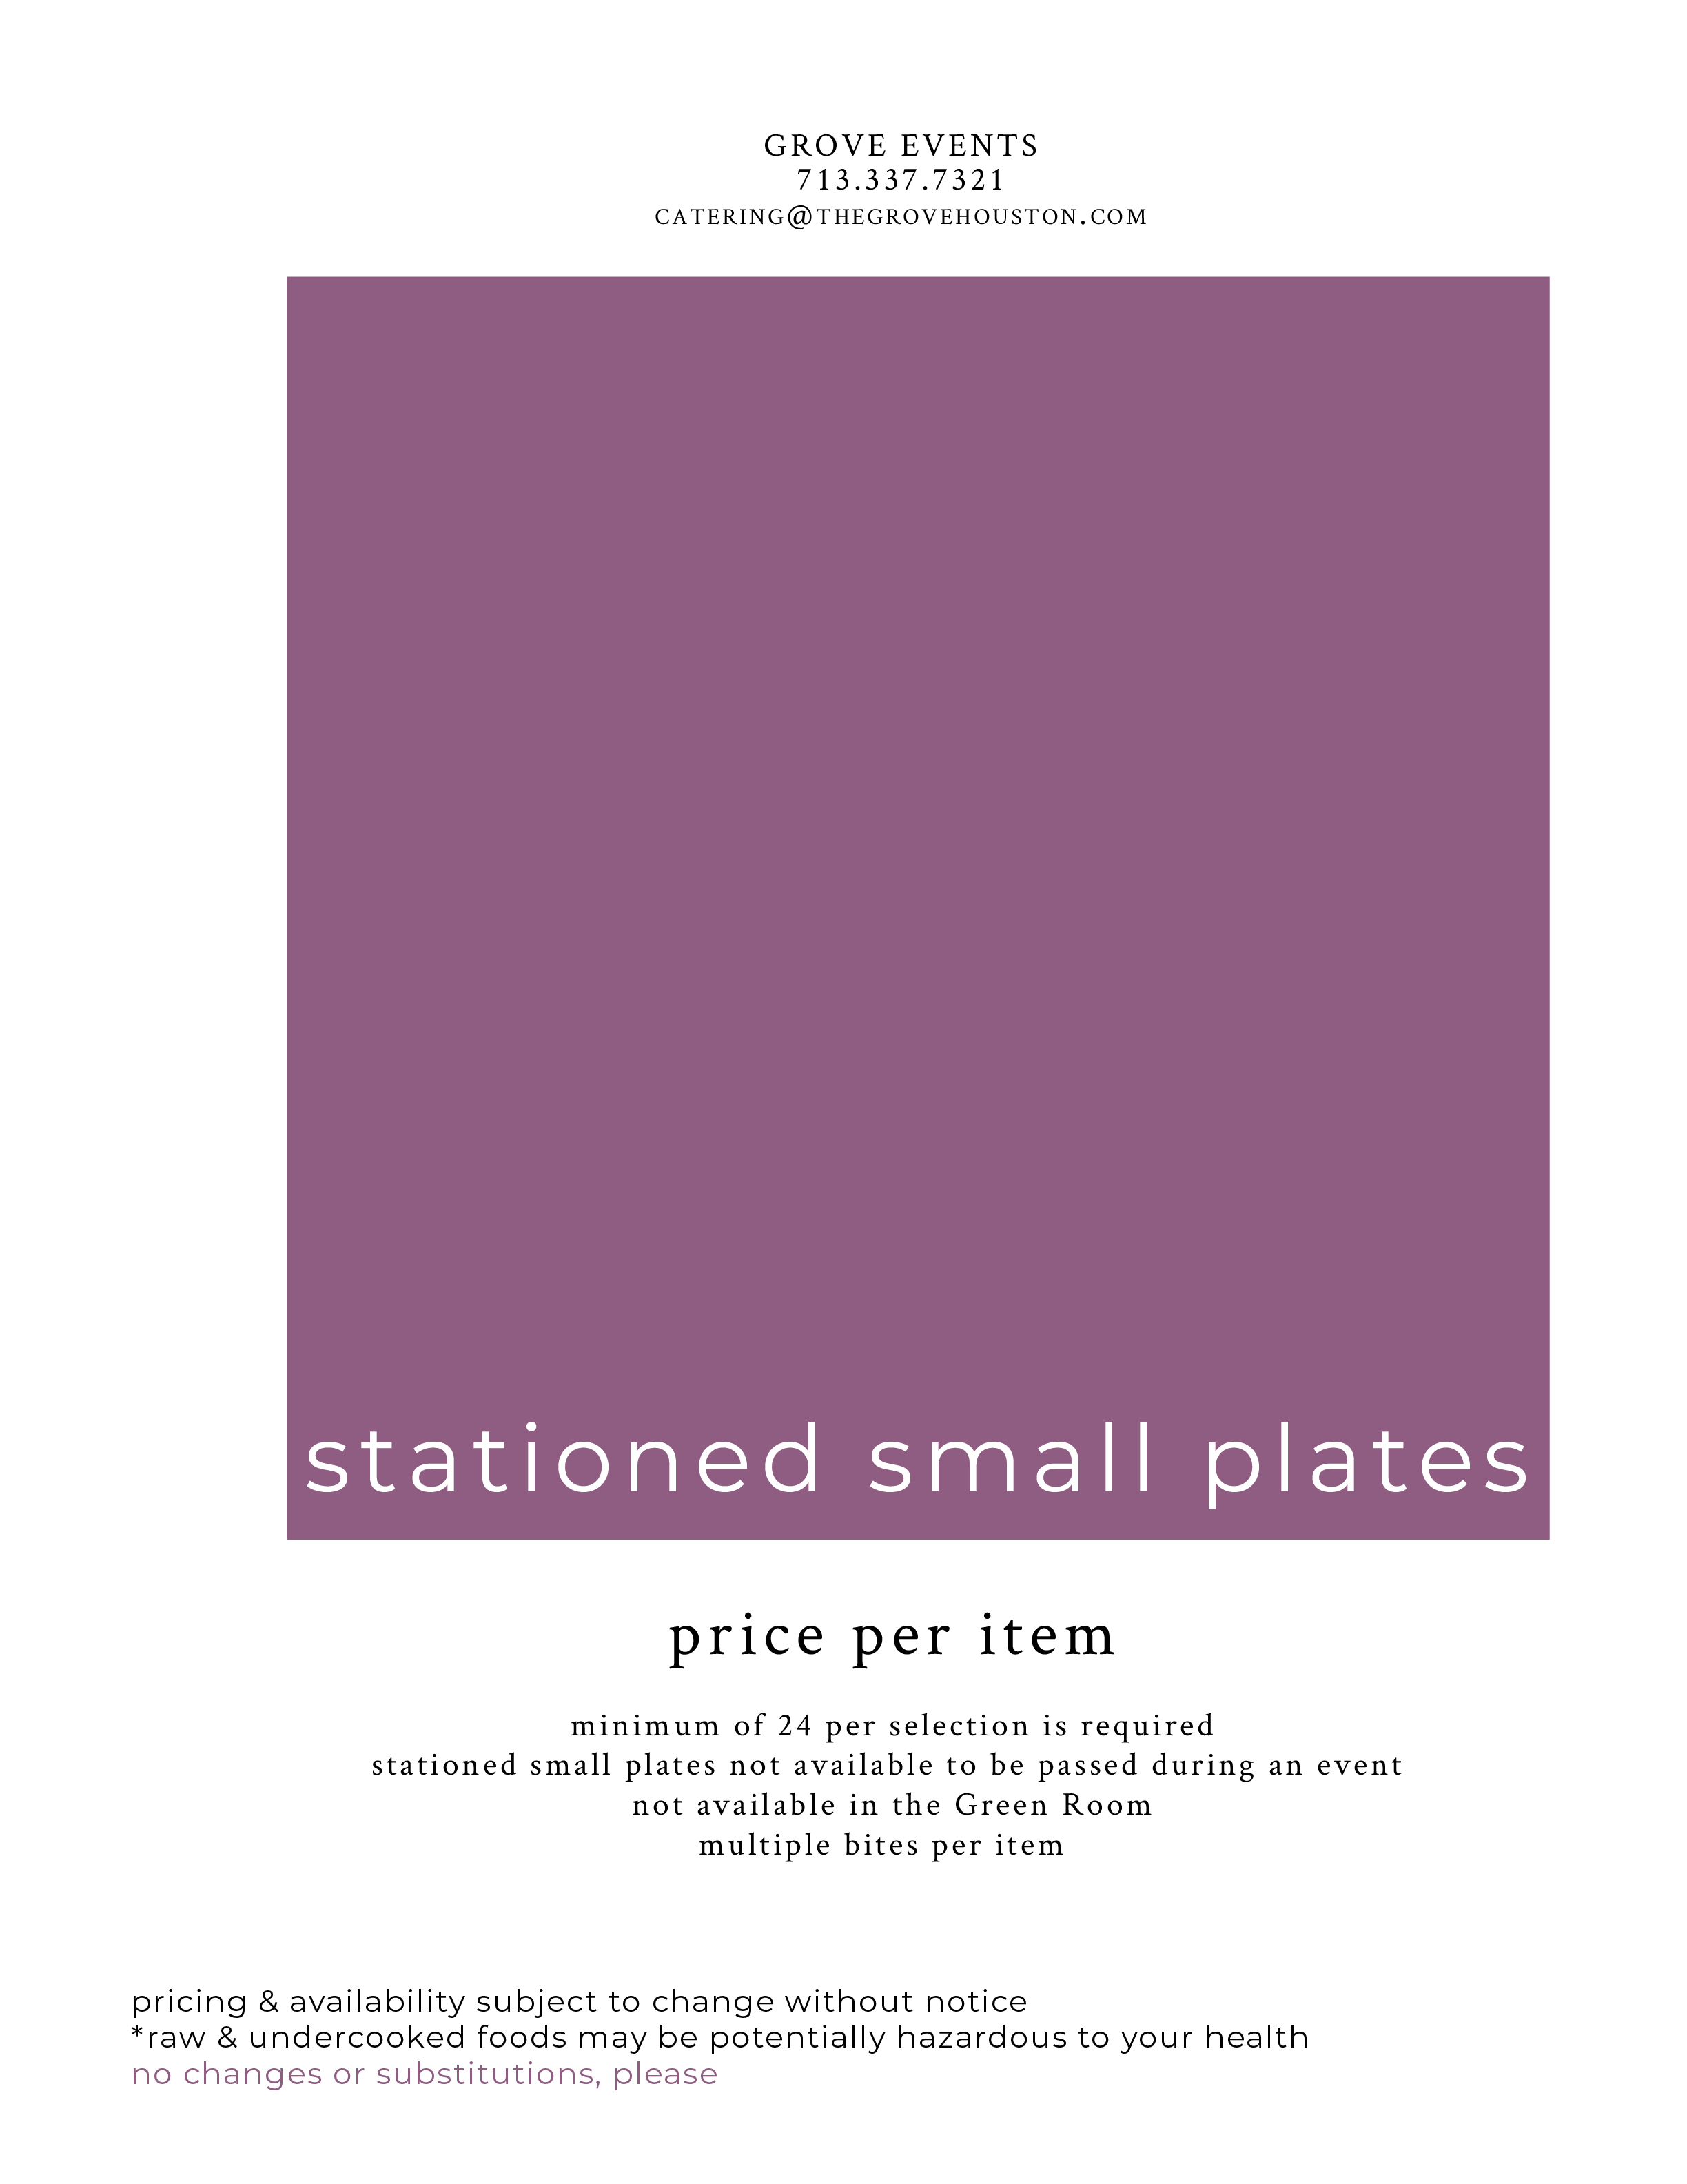 STATIONED SMALL PLATES @4x.png